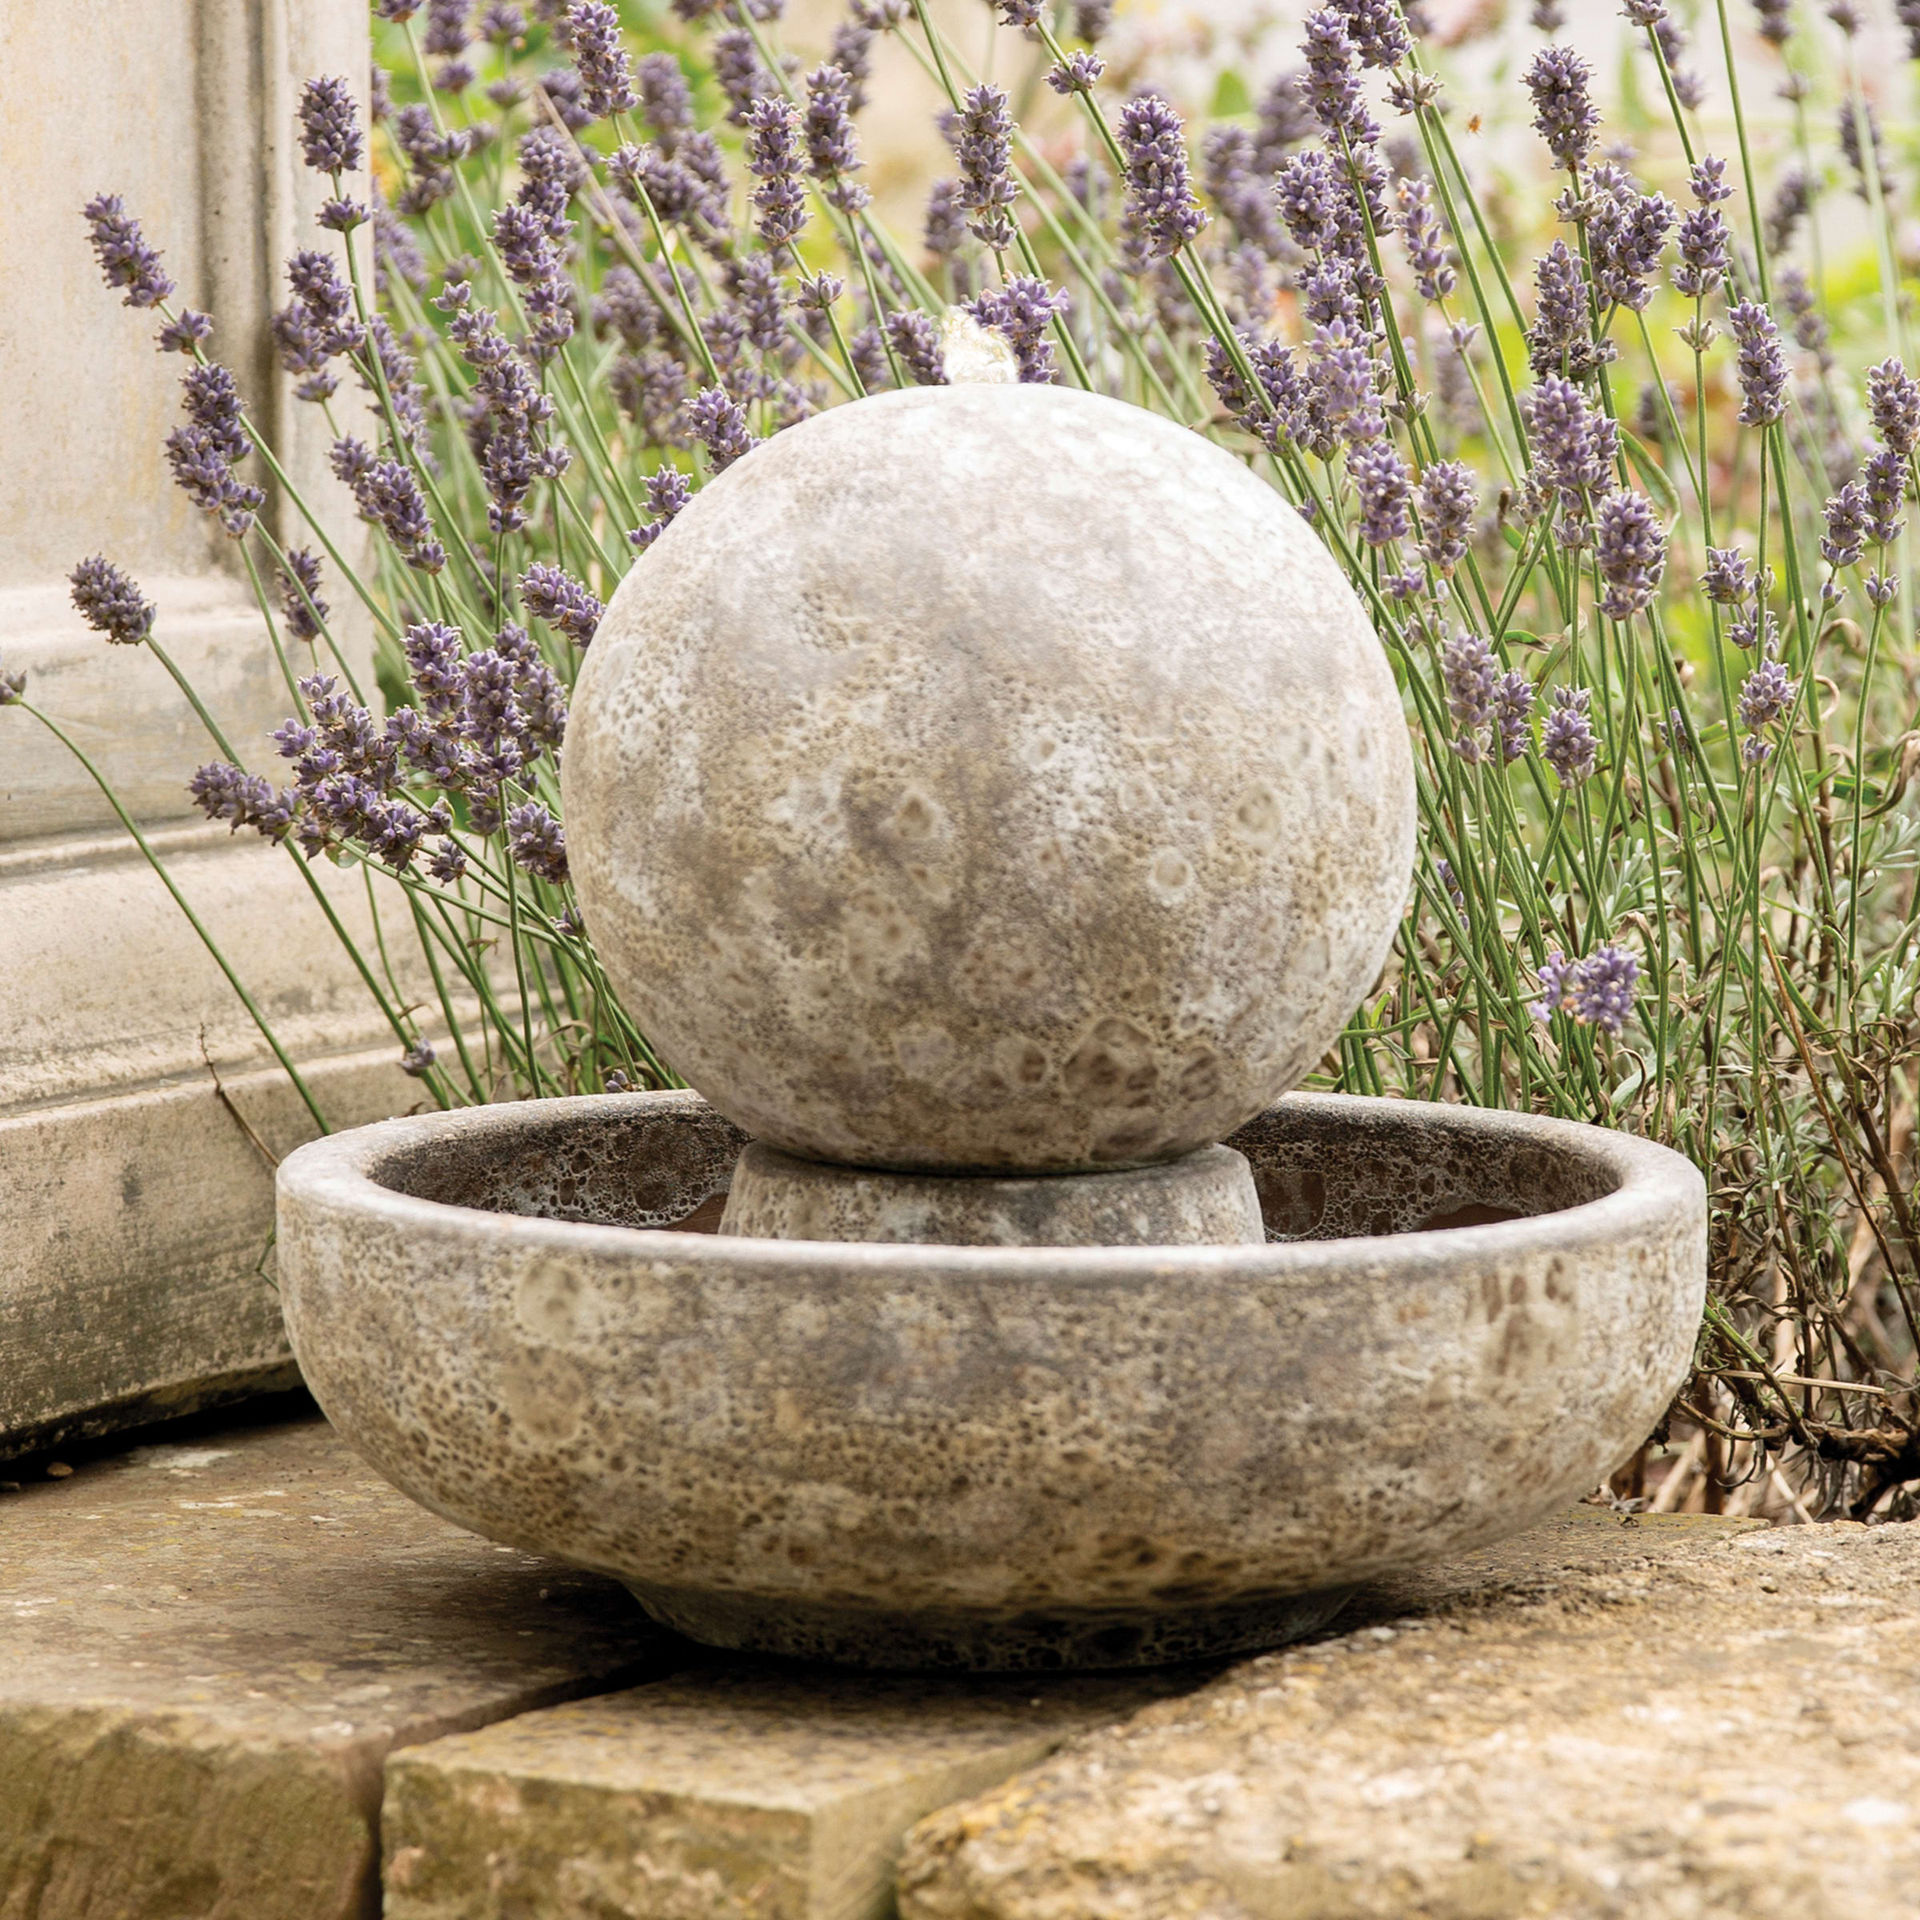 Small Ancient Ball Water Feature